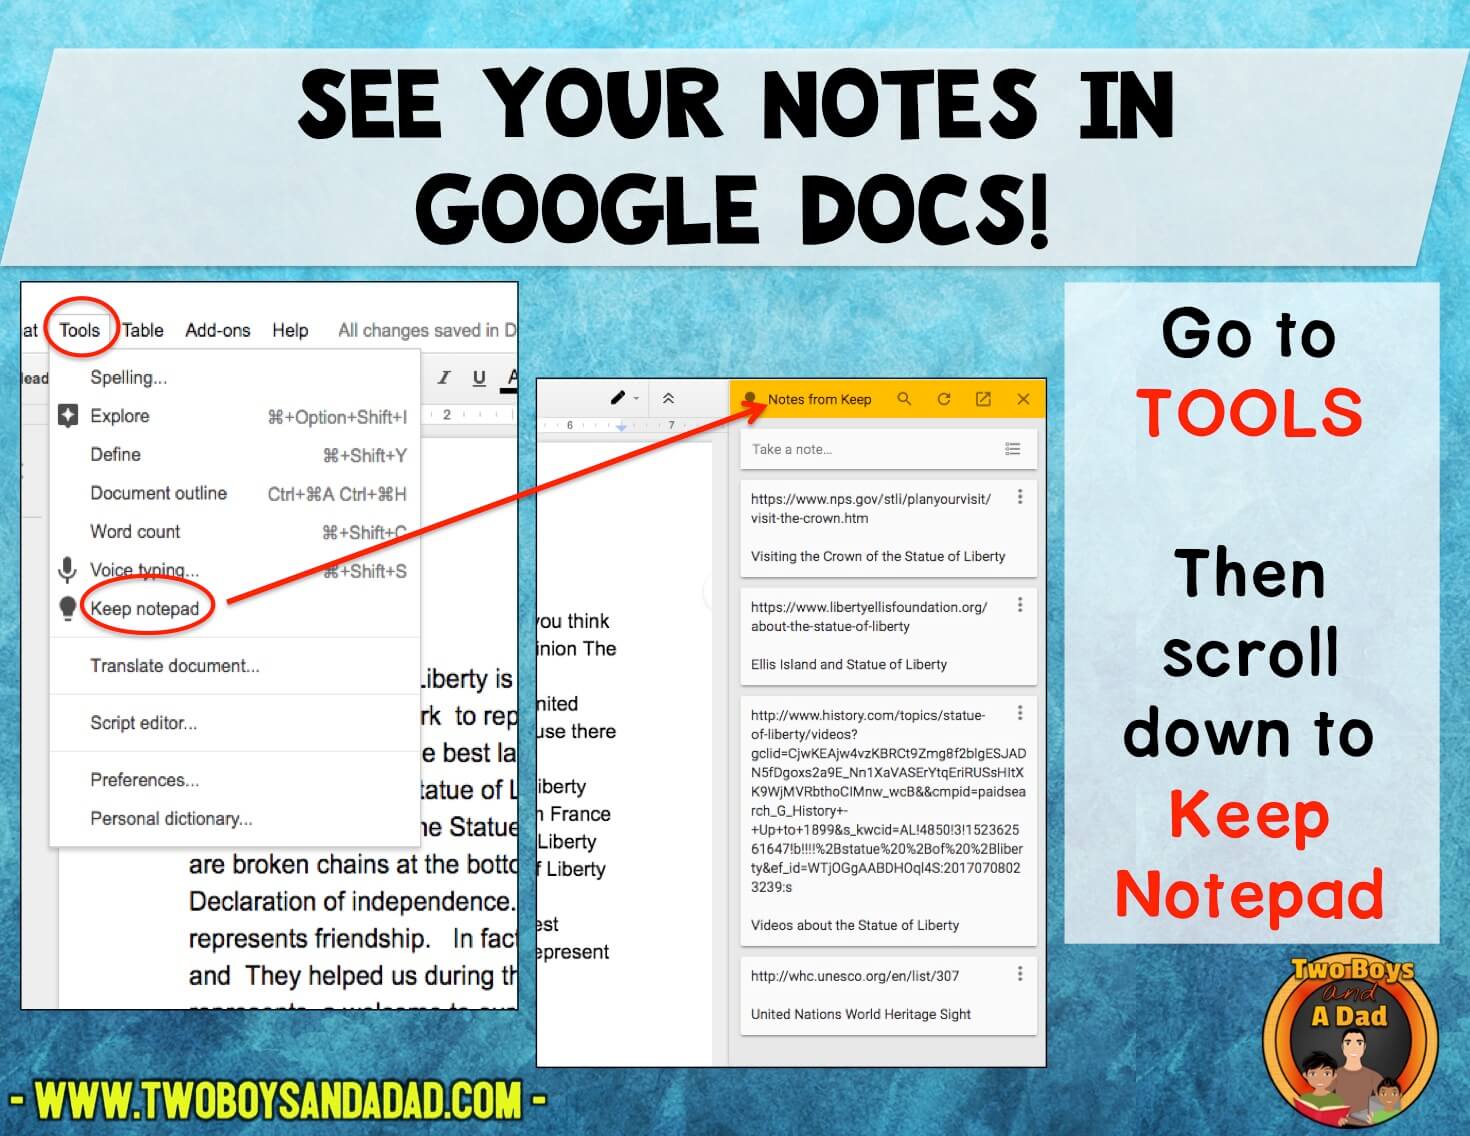 Notes in Google Docs